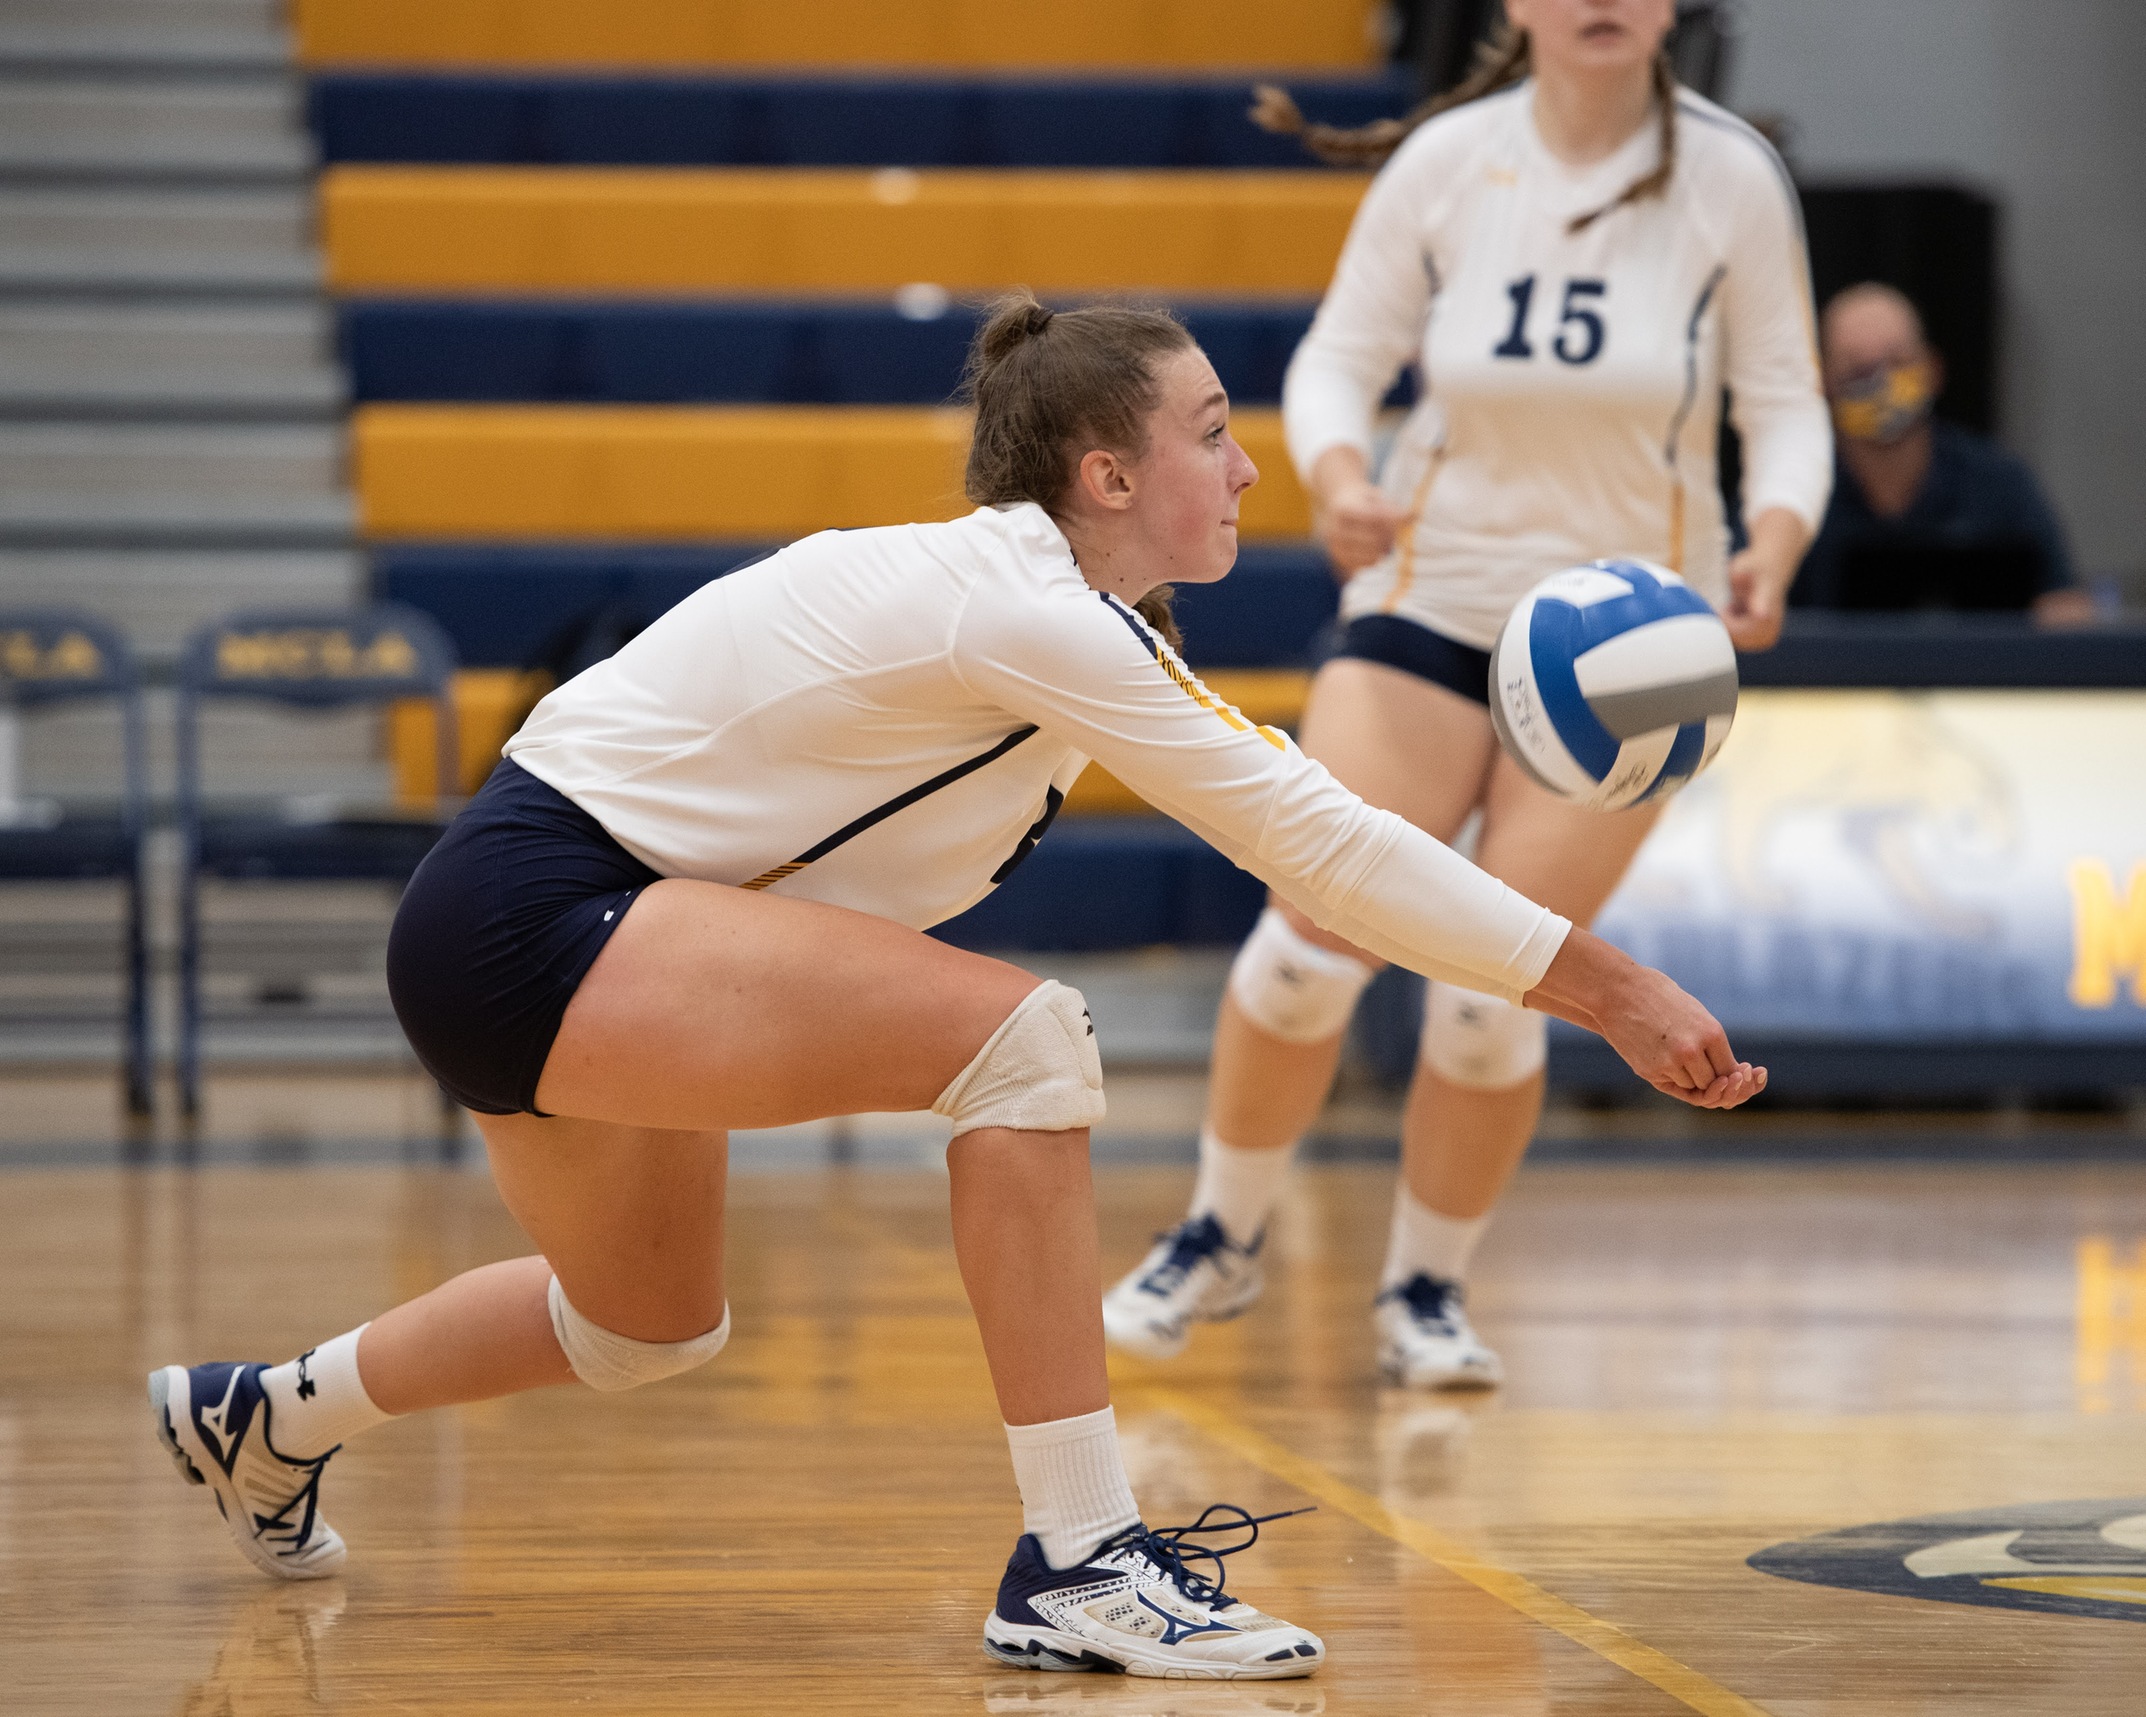 Scattergood leads MCLA Volleyball to 3-1 win over Bears, Trailblazers will host BSU Tuesday night